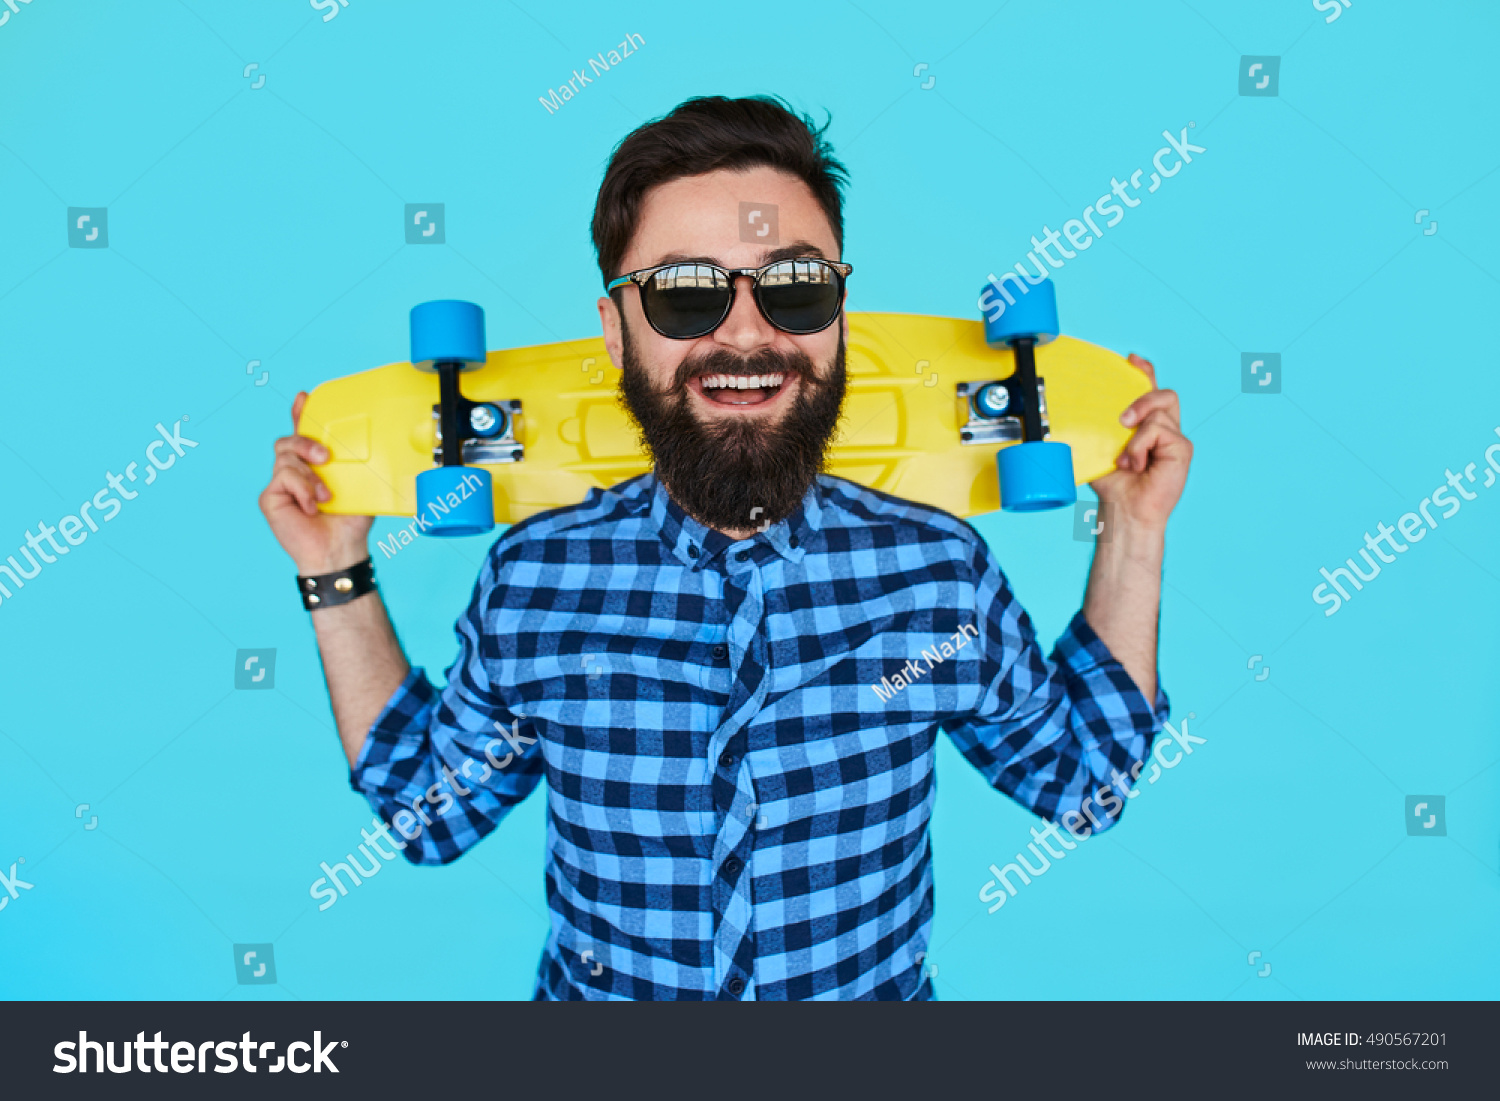 Young hipster bearded man with a yellow skateboard and sunglasses smiling on blue background #490567201